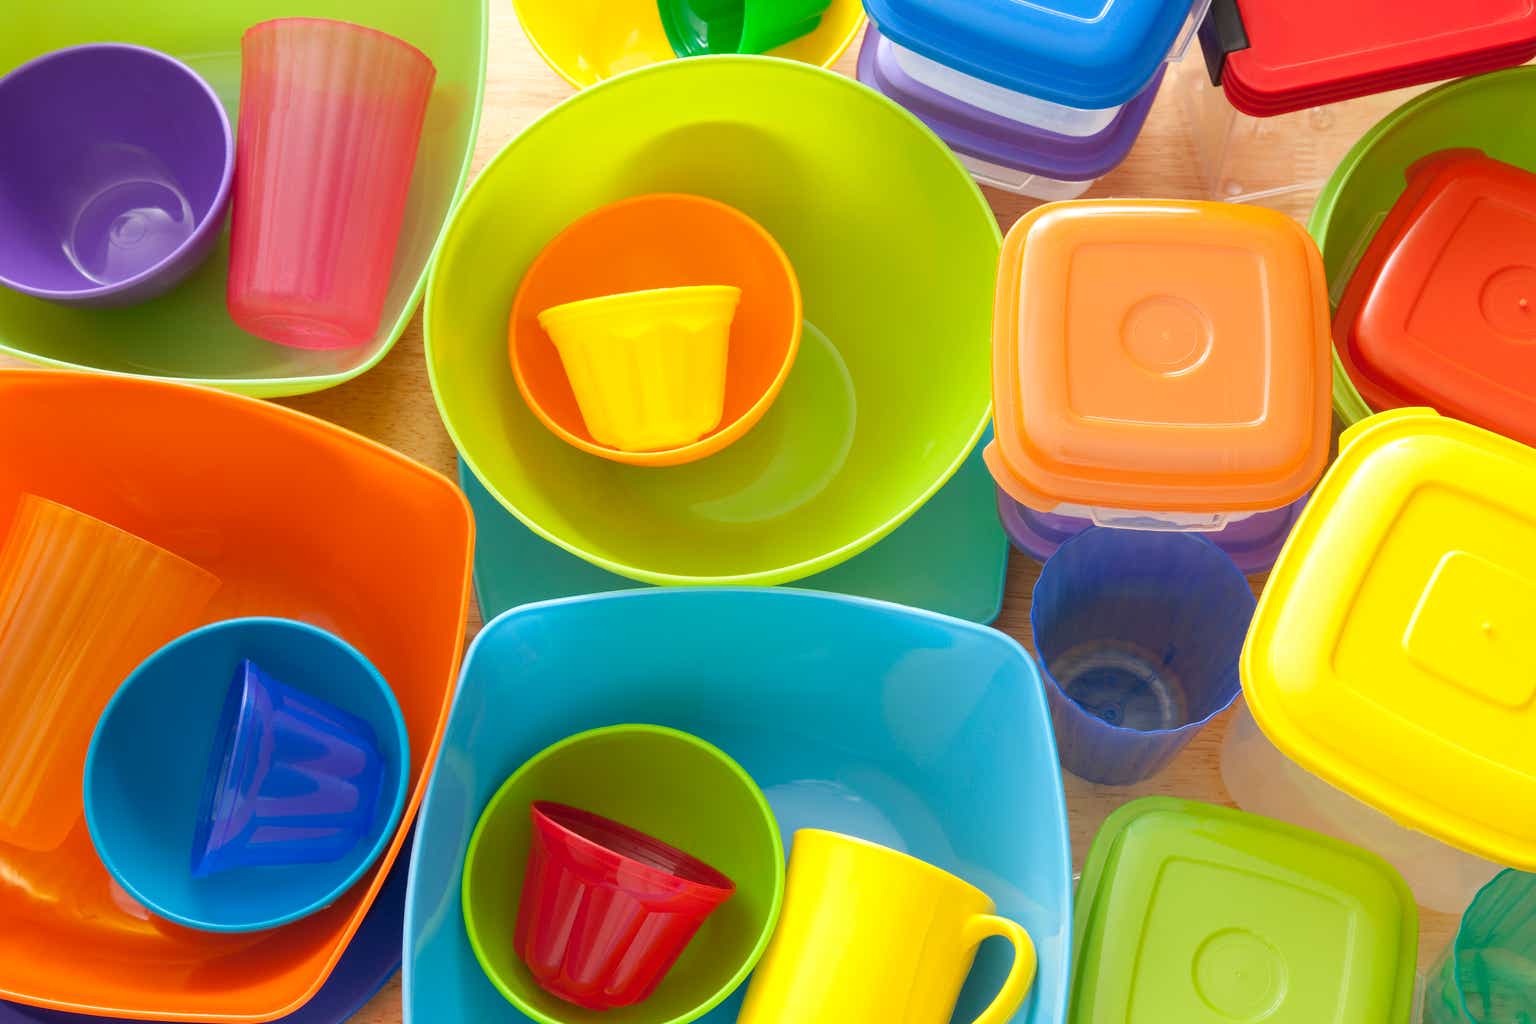 Tupperware Brands: Risky Play Ahead Of Q1 2023 Earnings (NYSE:TUP)